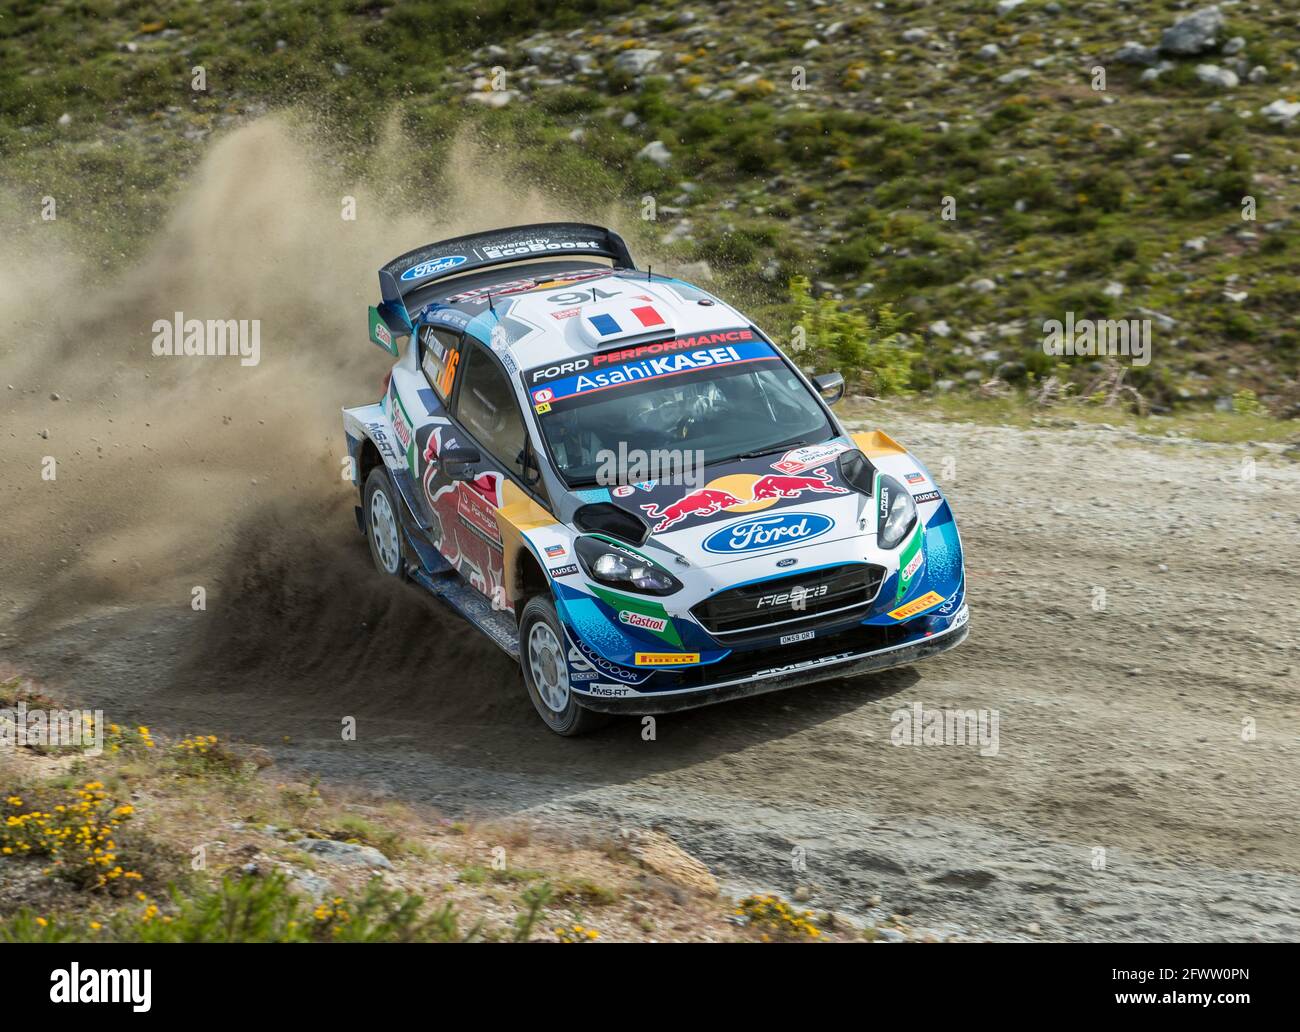 Cabeceiras, Portugal - 22. Mai 2021: 16 Adrien FORMAUX (FRA), Renaud JAMOUL (Bel), M-SPORT FORD WORLD RALLY TEAM, FORD FIESTA WRC, WRC Portugal 2021 Stockfoto